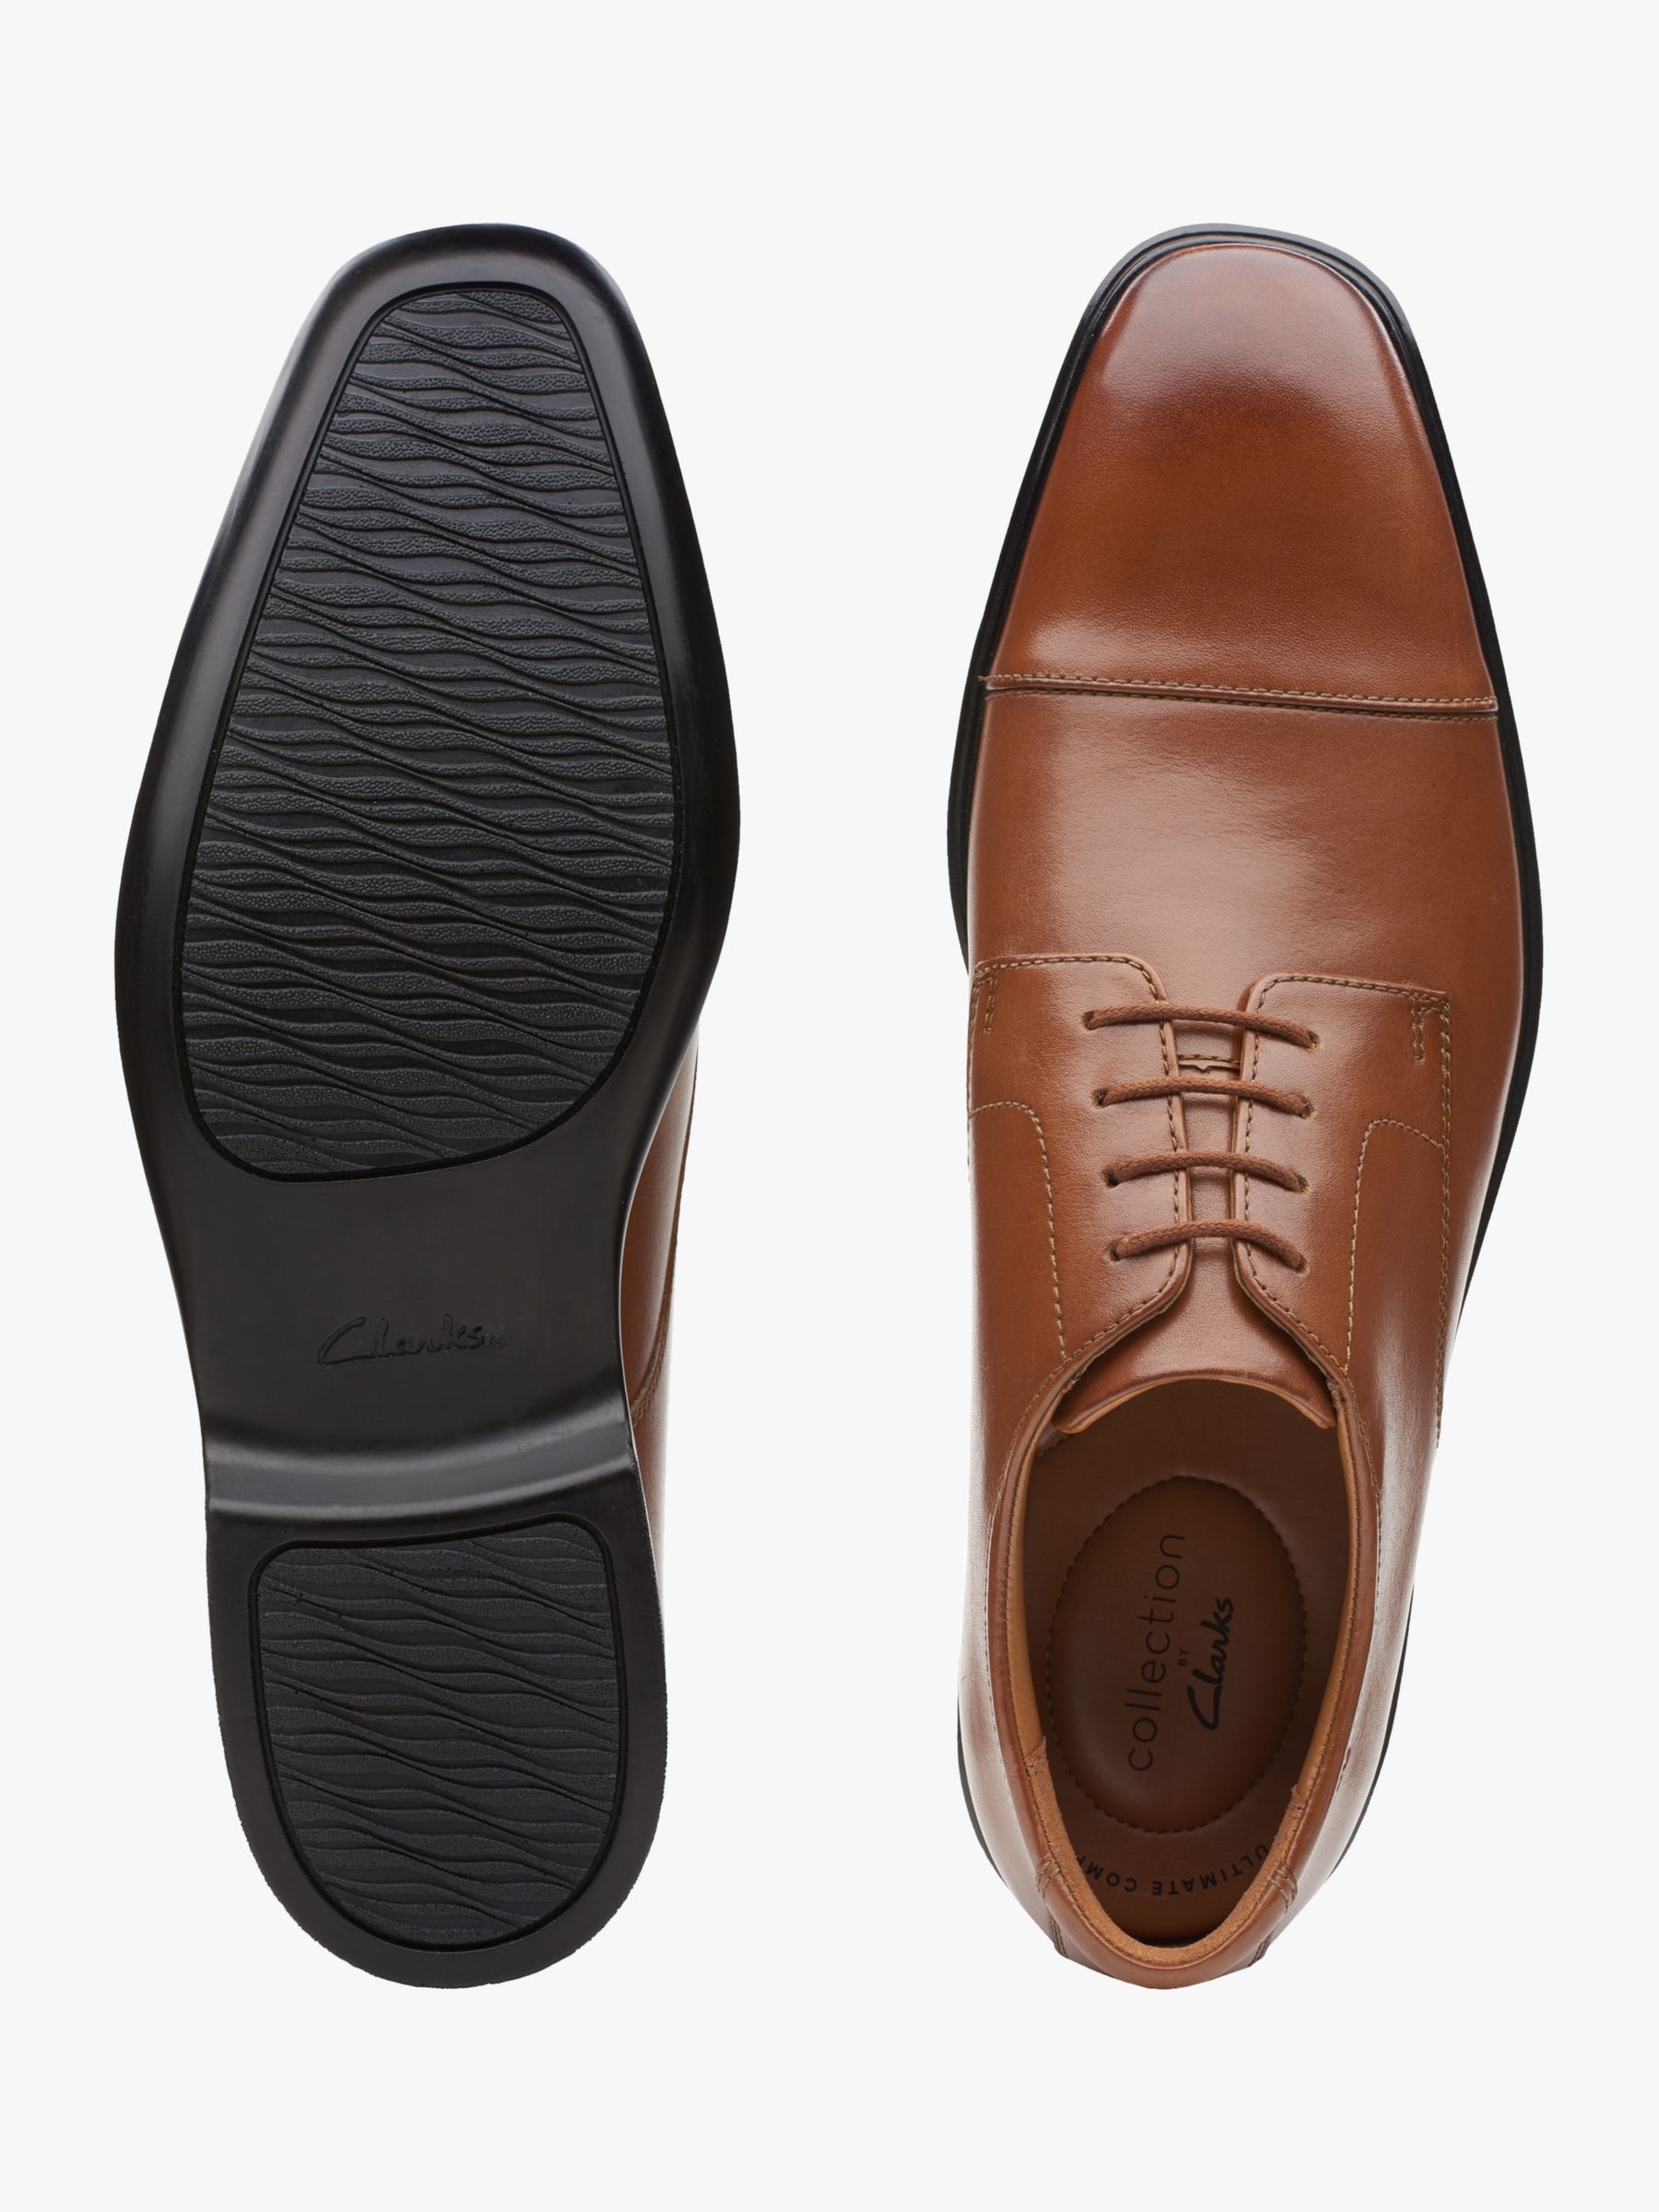 clarks brown shoes